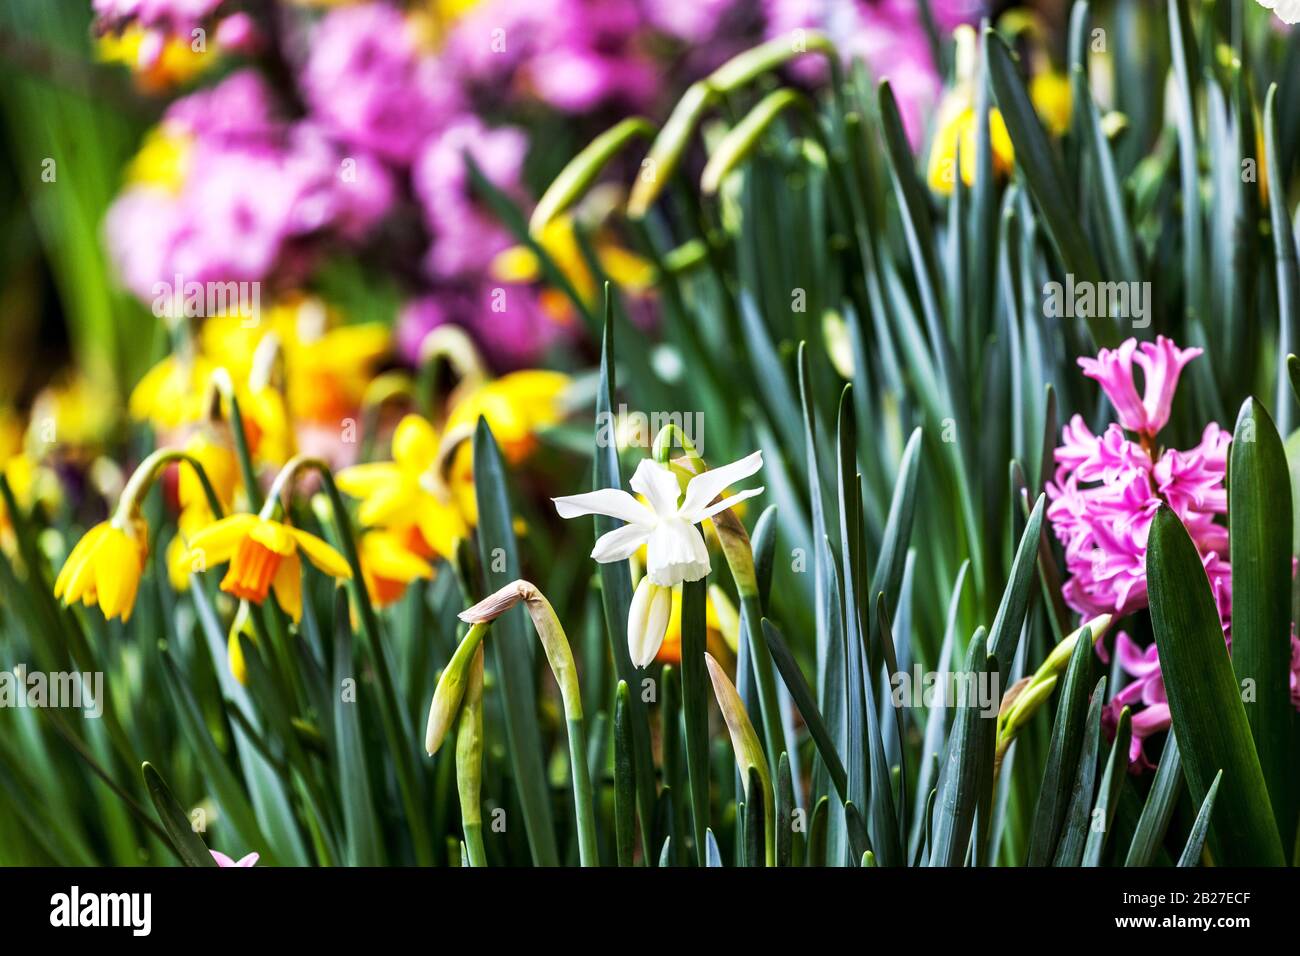 Spring garden border daffodils march flowers Stock Photo